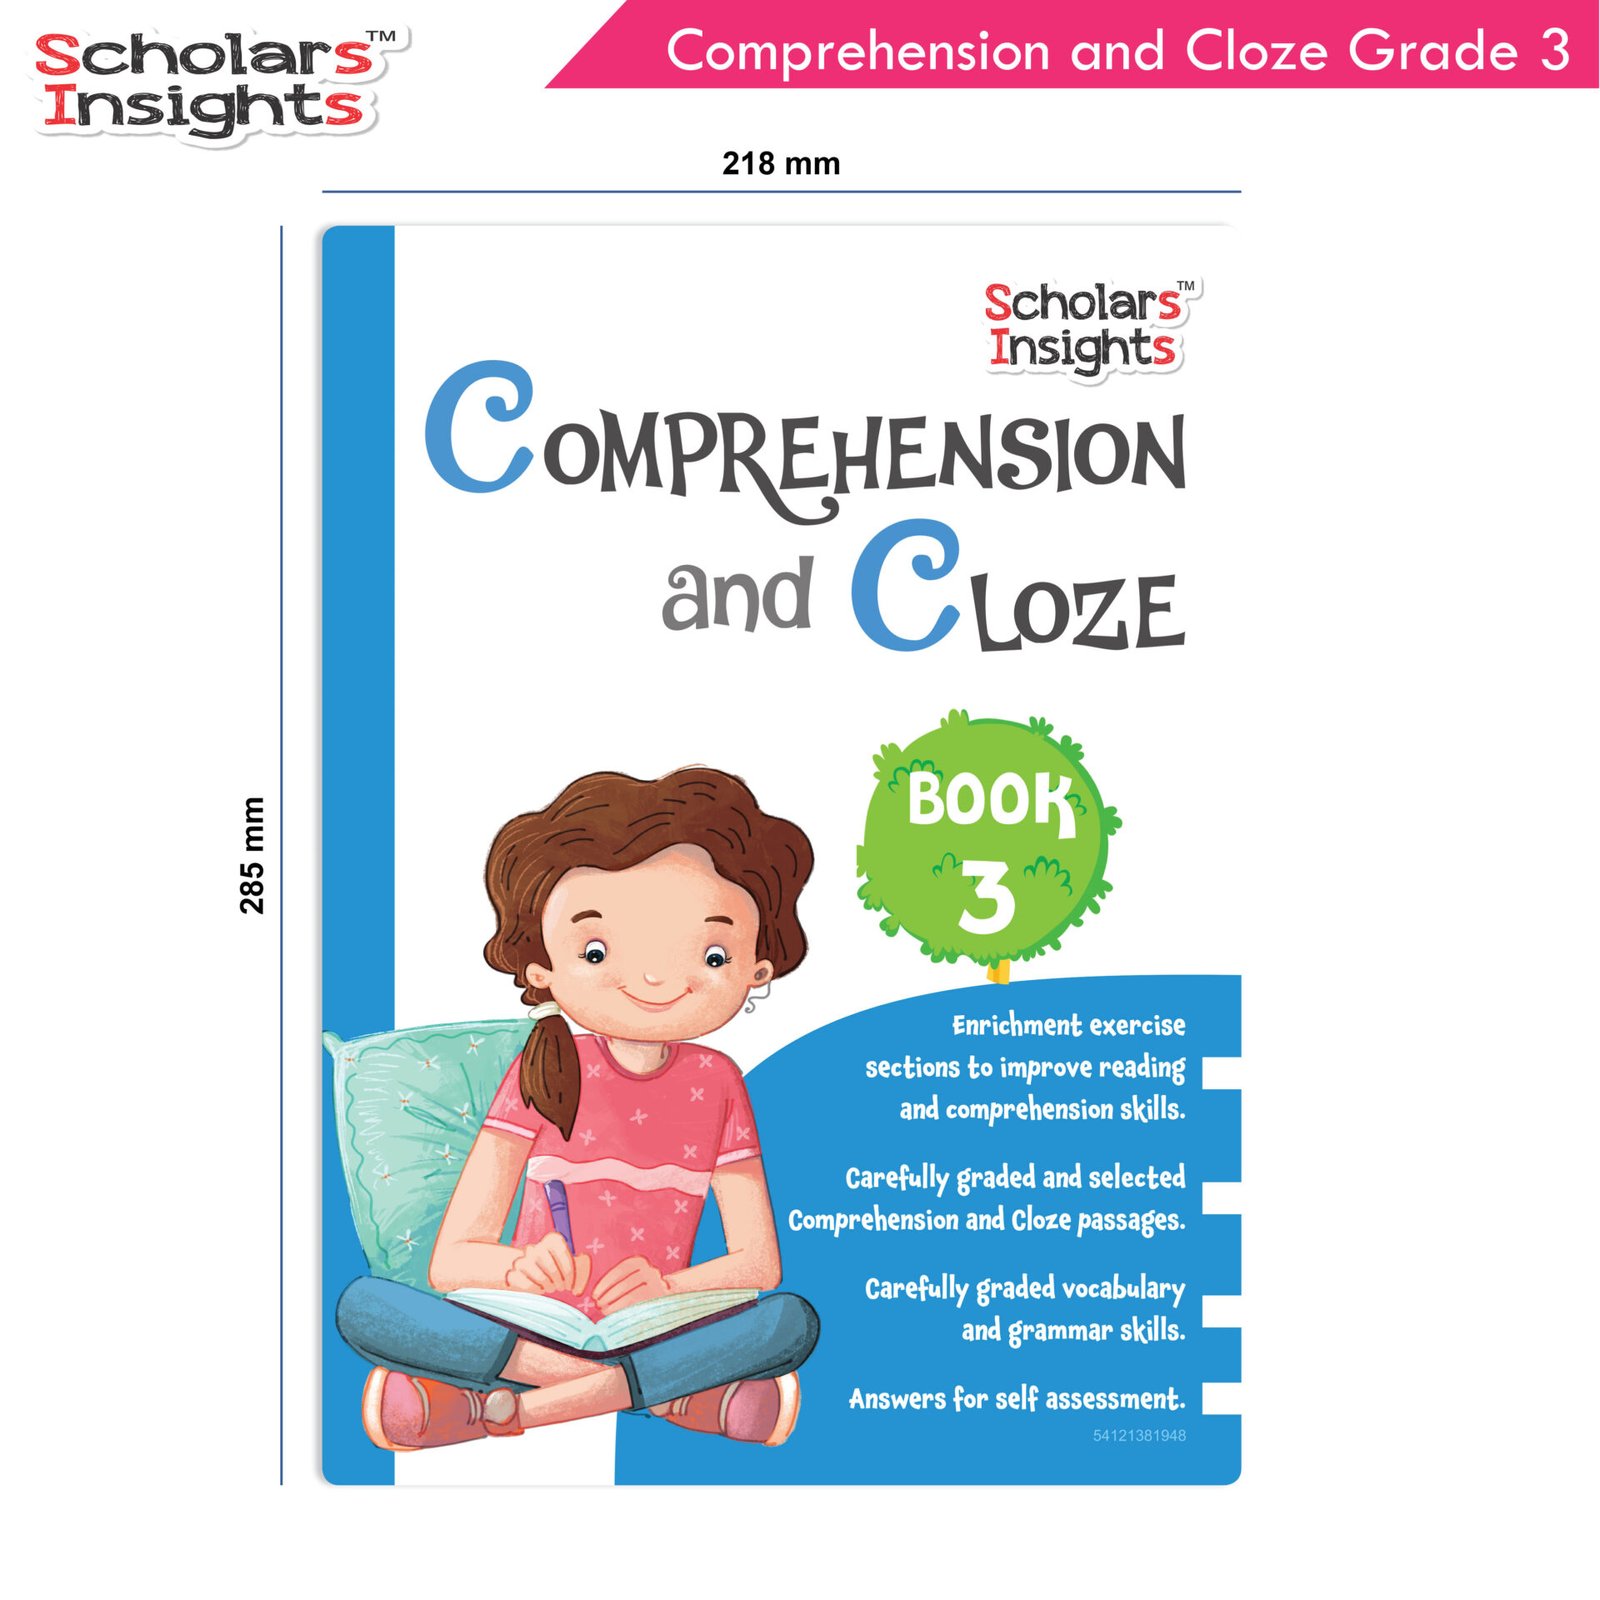 Scholars Insights Comprehension and Cloze Grade 3 2 1